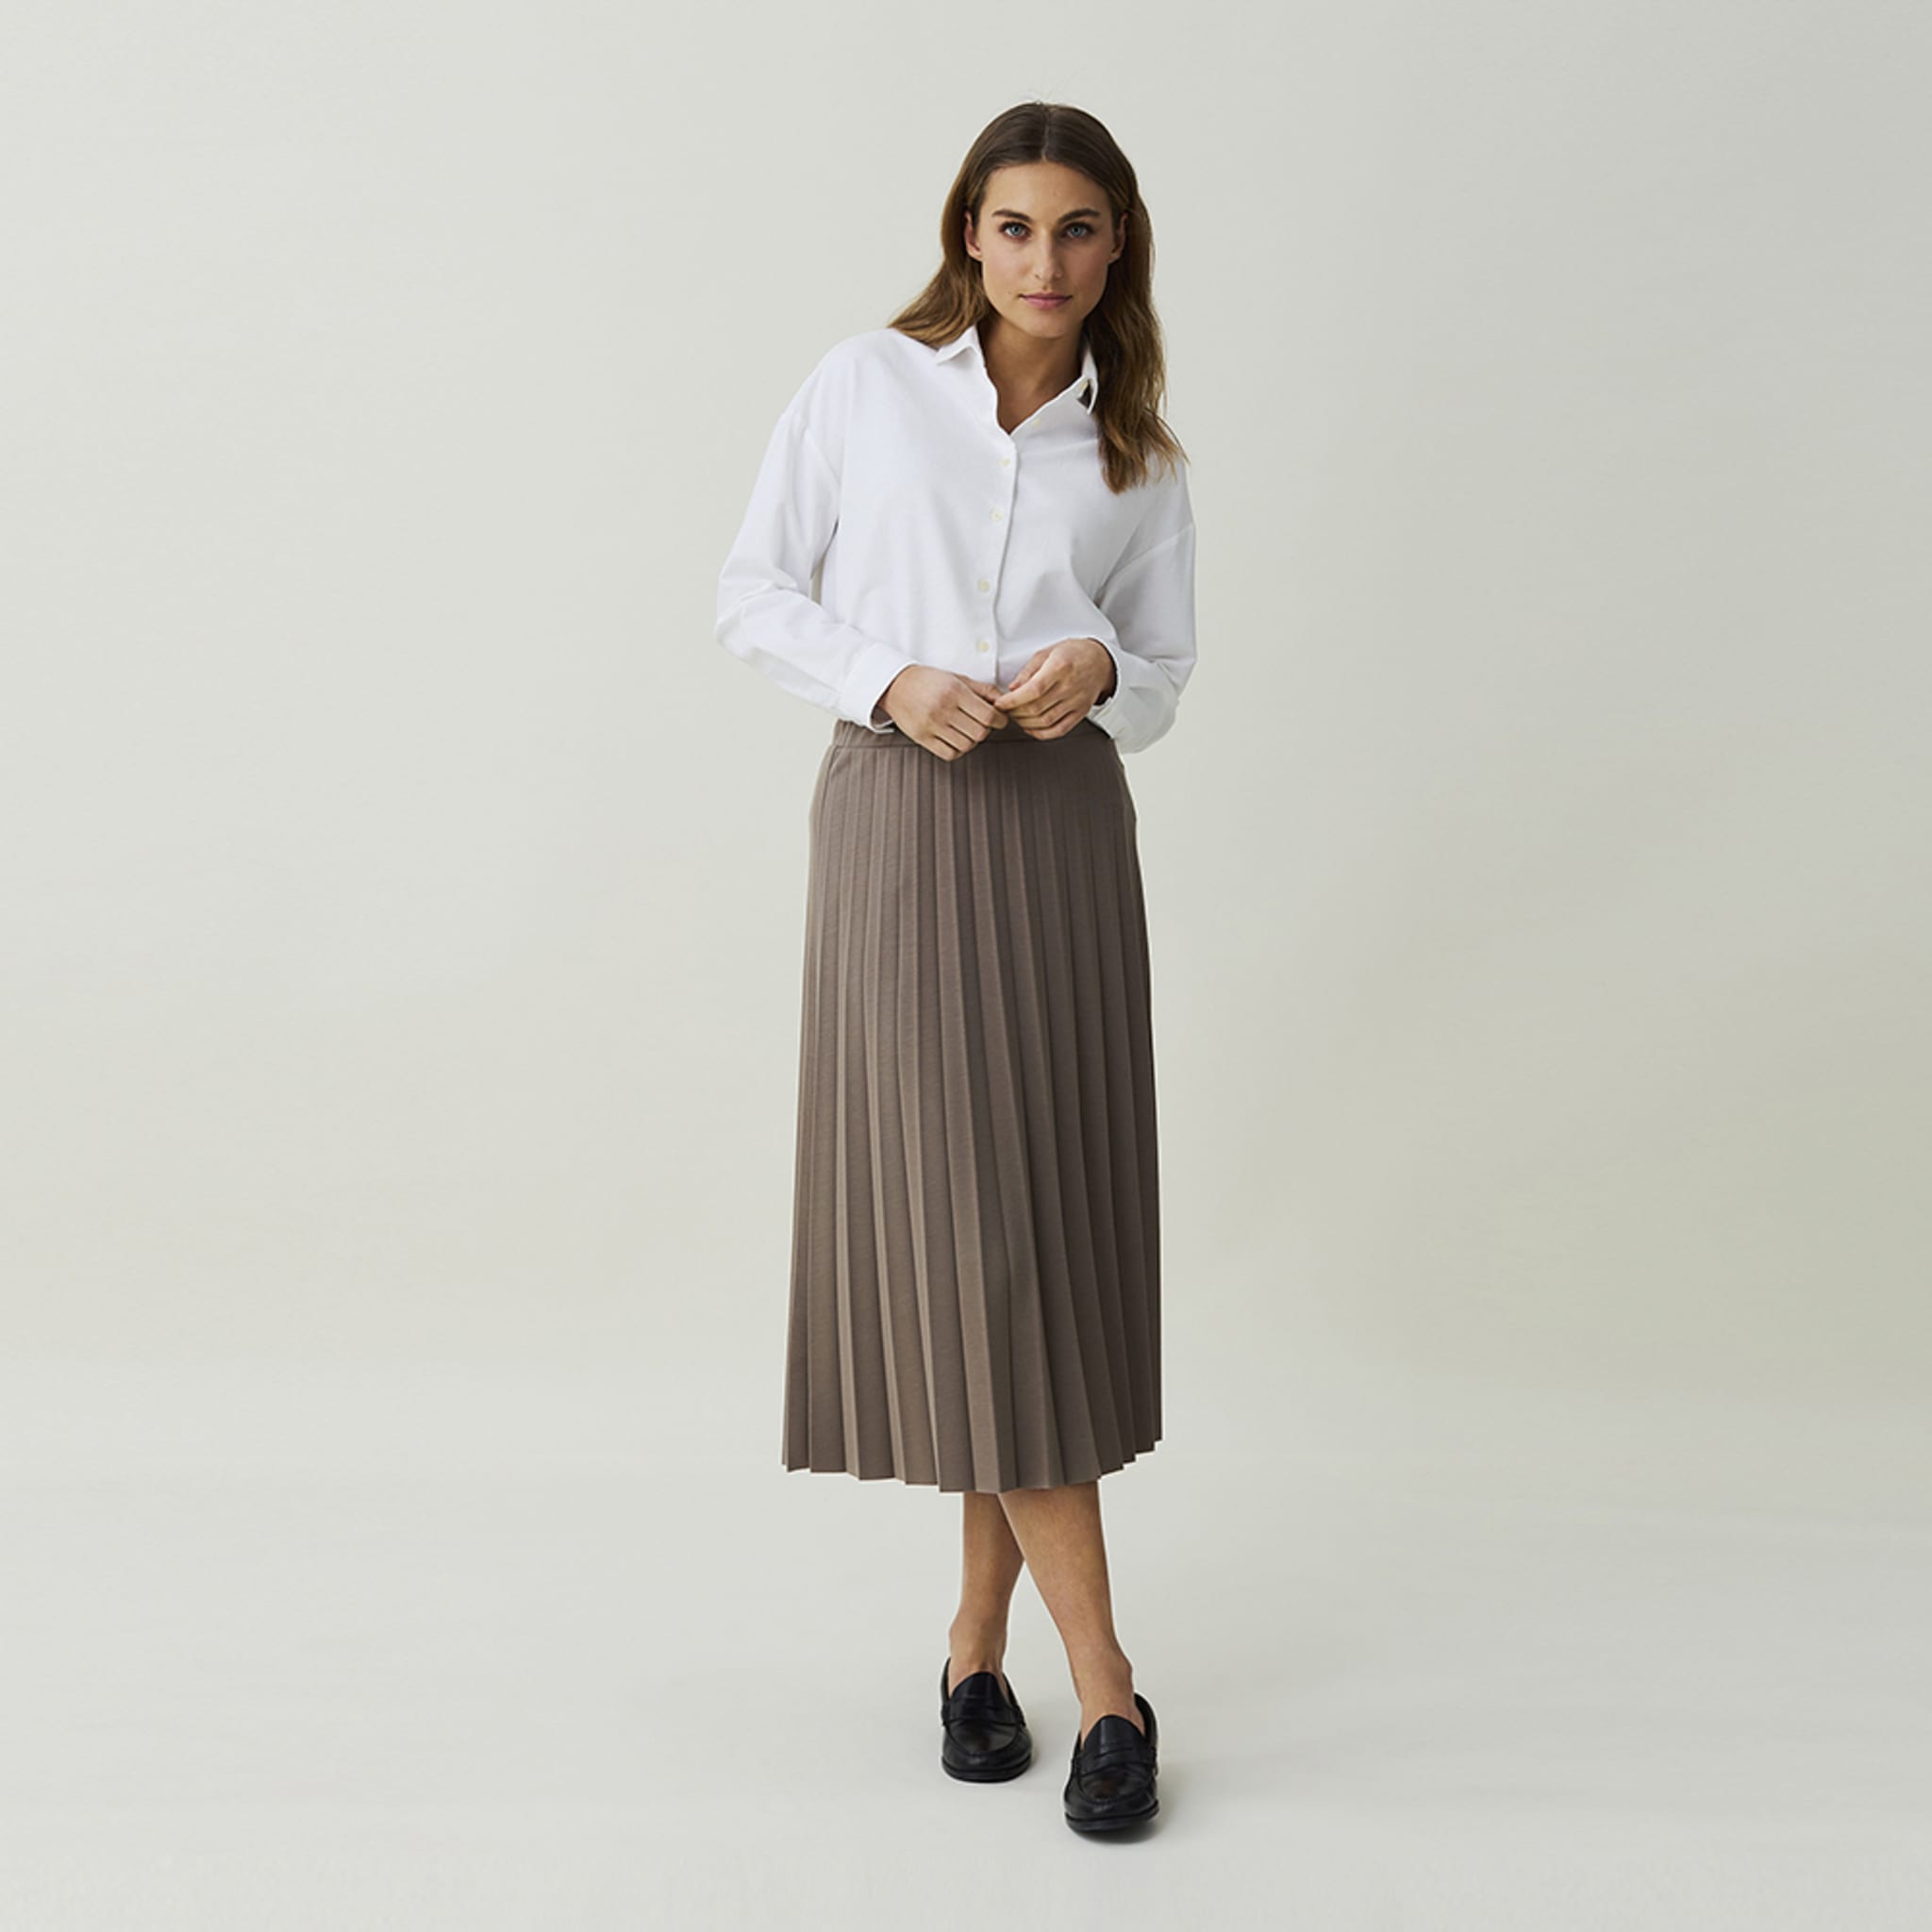 Willow Pleated Jersey Skirt, light brown